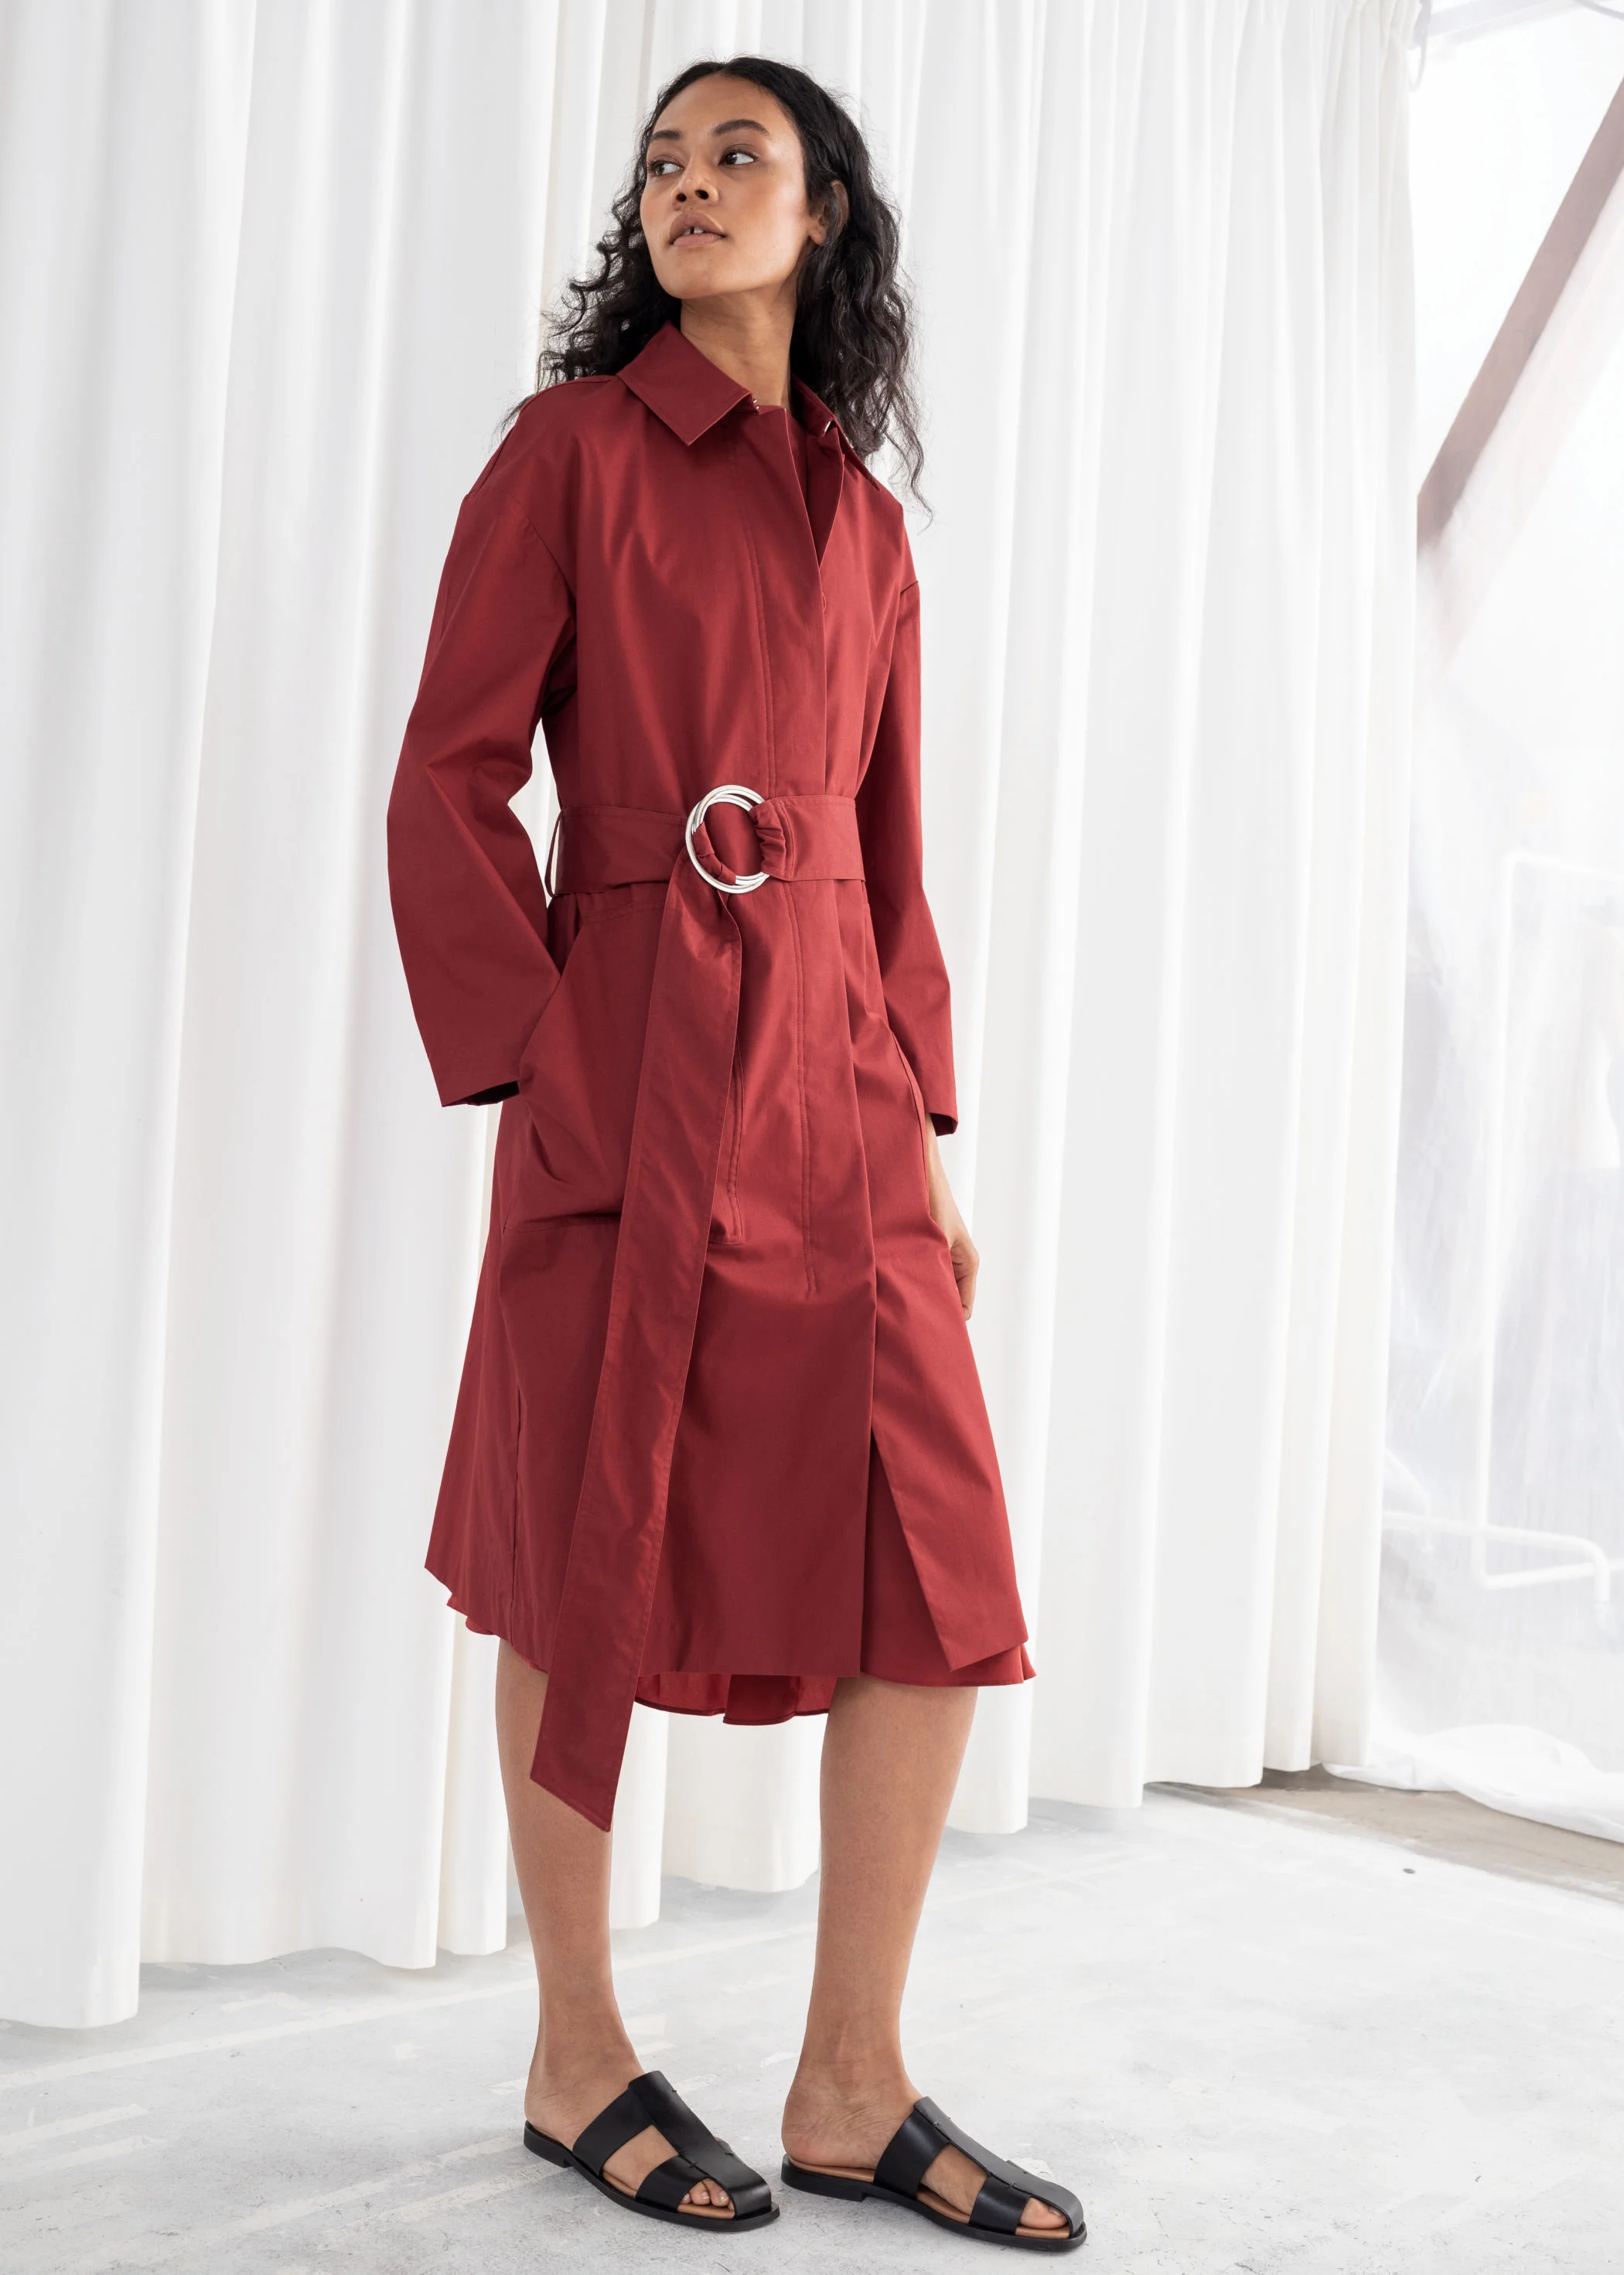 Belted Cotton Twill Trenchcoat, Belted Cotton Twill Trench Coat